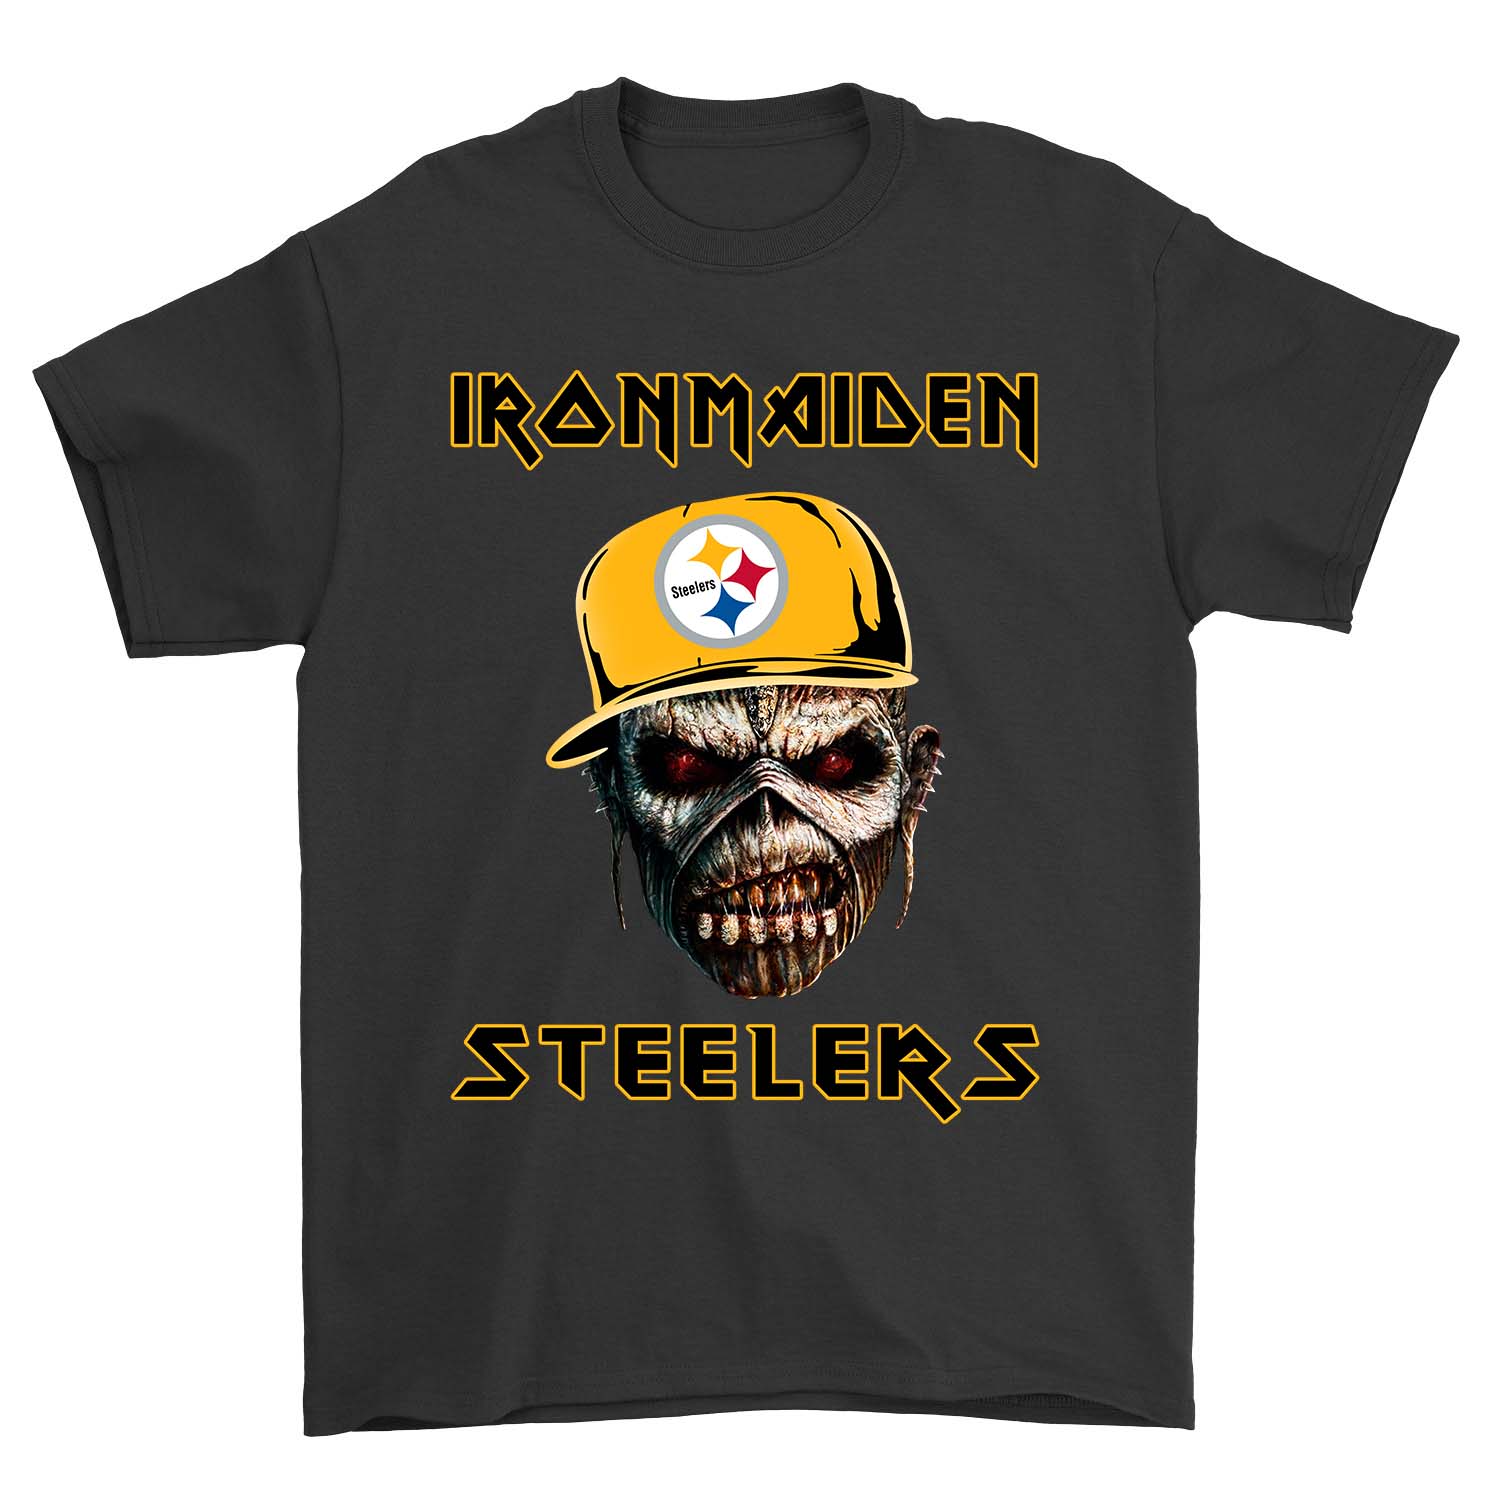 NFL Pittsburgh Steelers Ironmaiden Pittsburgh Steelers Tank Top Shirt Size S-5xl